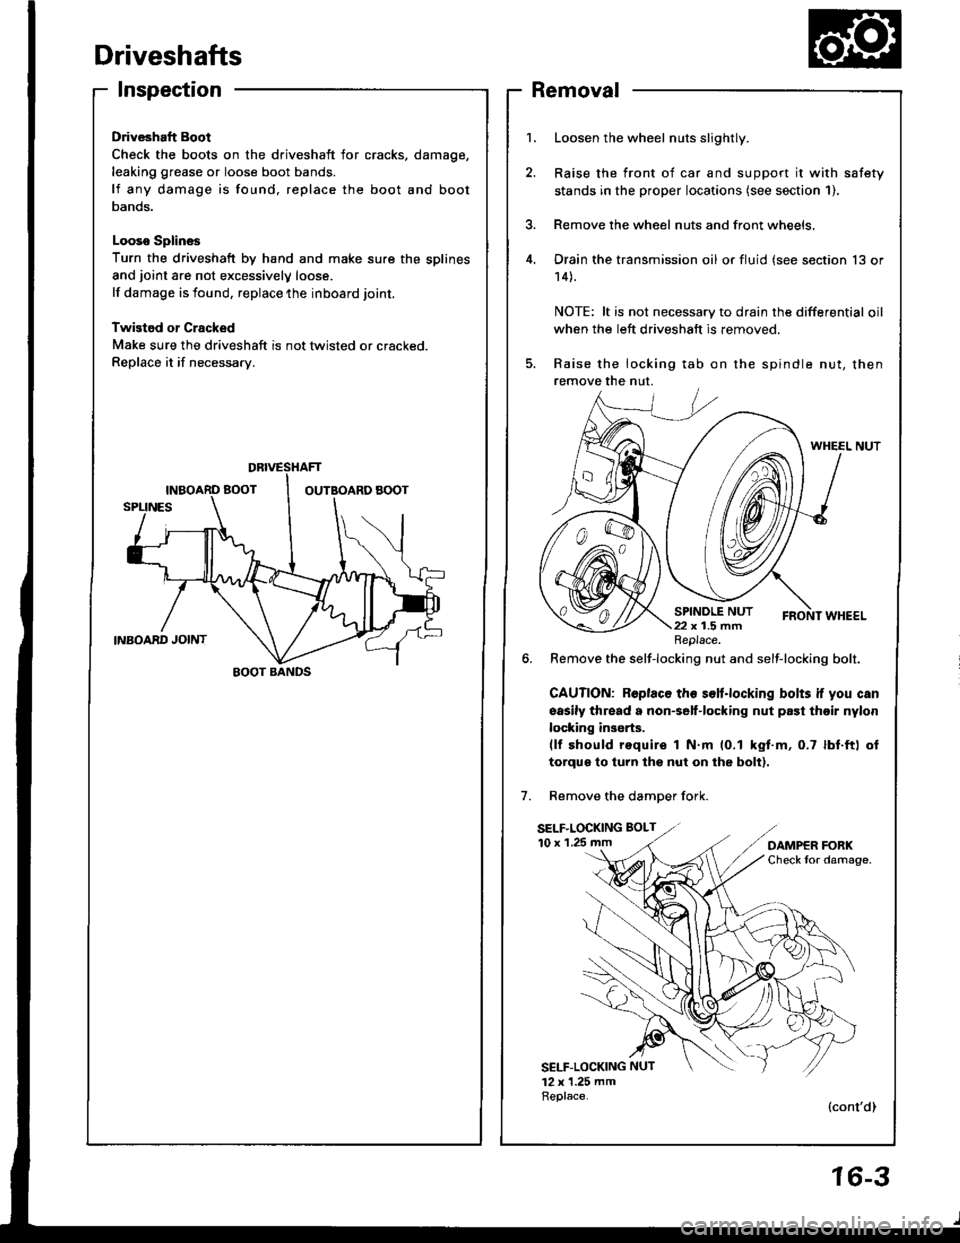 HONDA INTEGRA 1994 4.G Workshop Manual Driveshafts
Inspection
Driveshaft Boot
Check the boots on the driveshaft for cracks,
leaking grease or loose boot bands.
lf any damage is found, replace the boot
Danos.
Looso Splines
Turn the drivesha